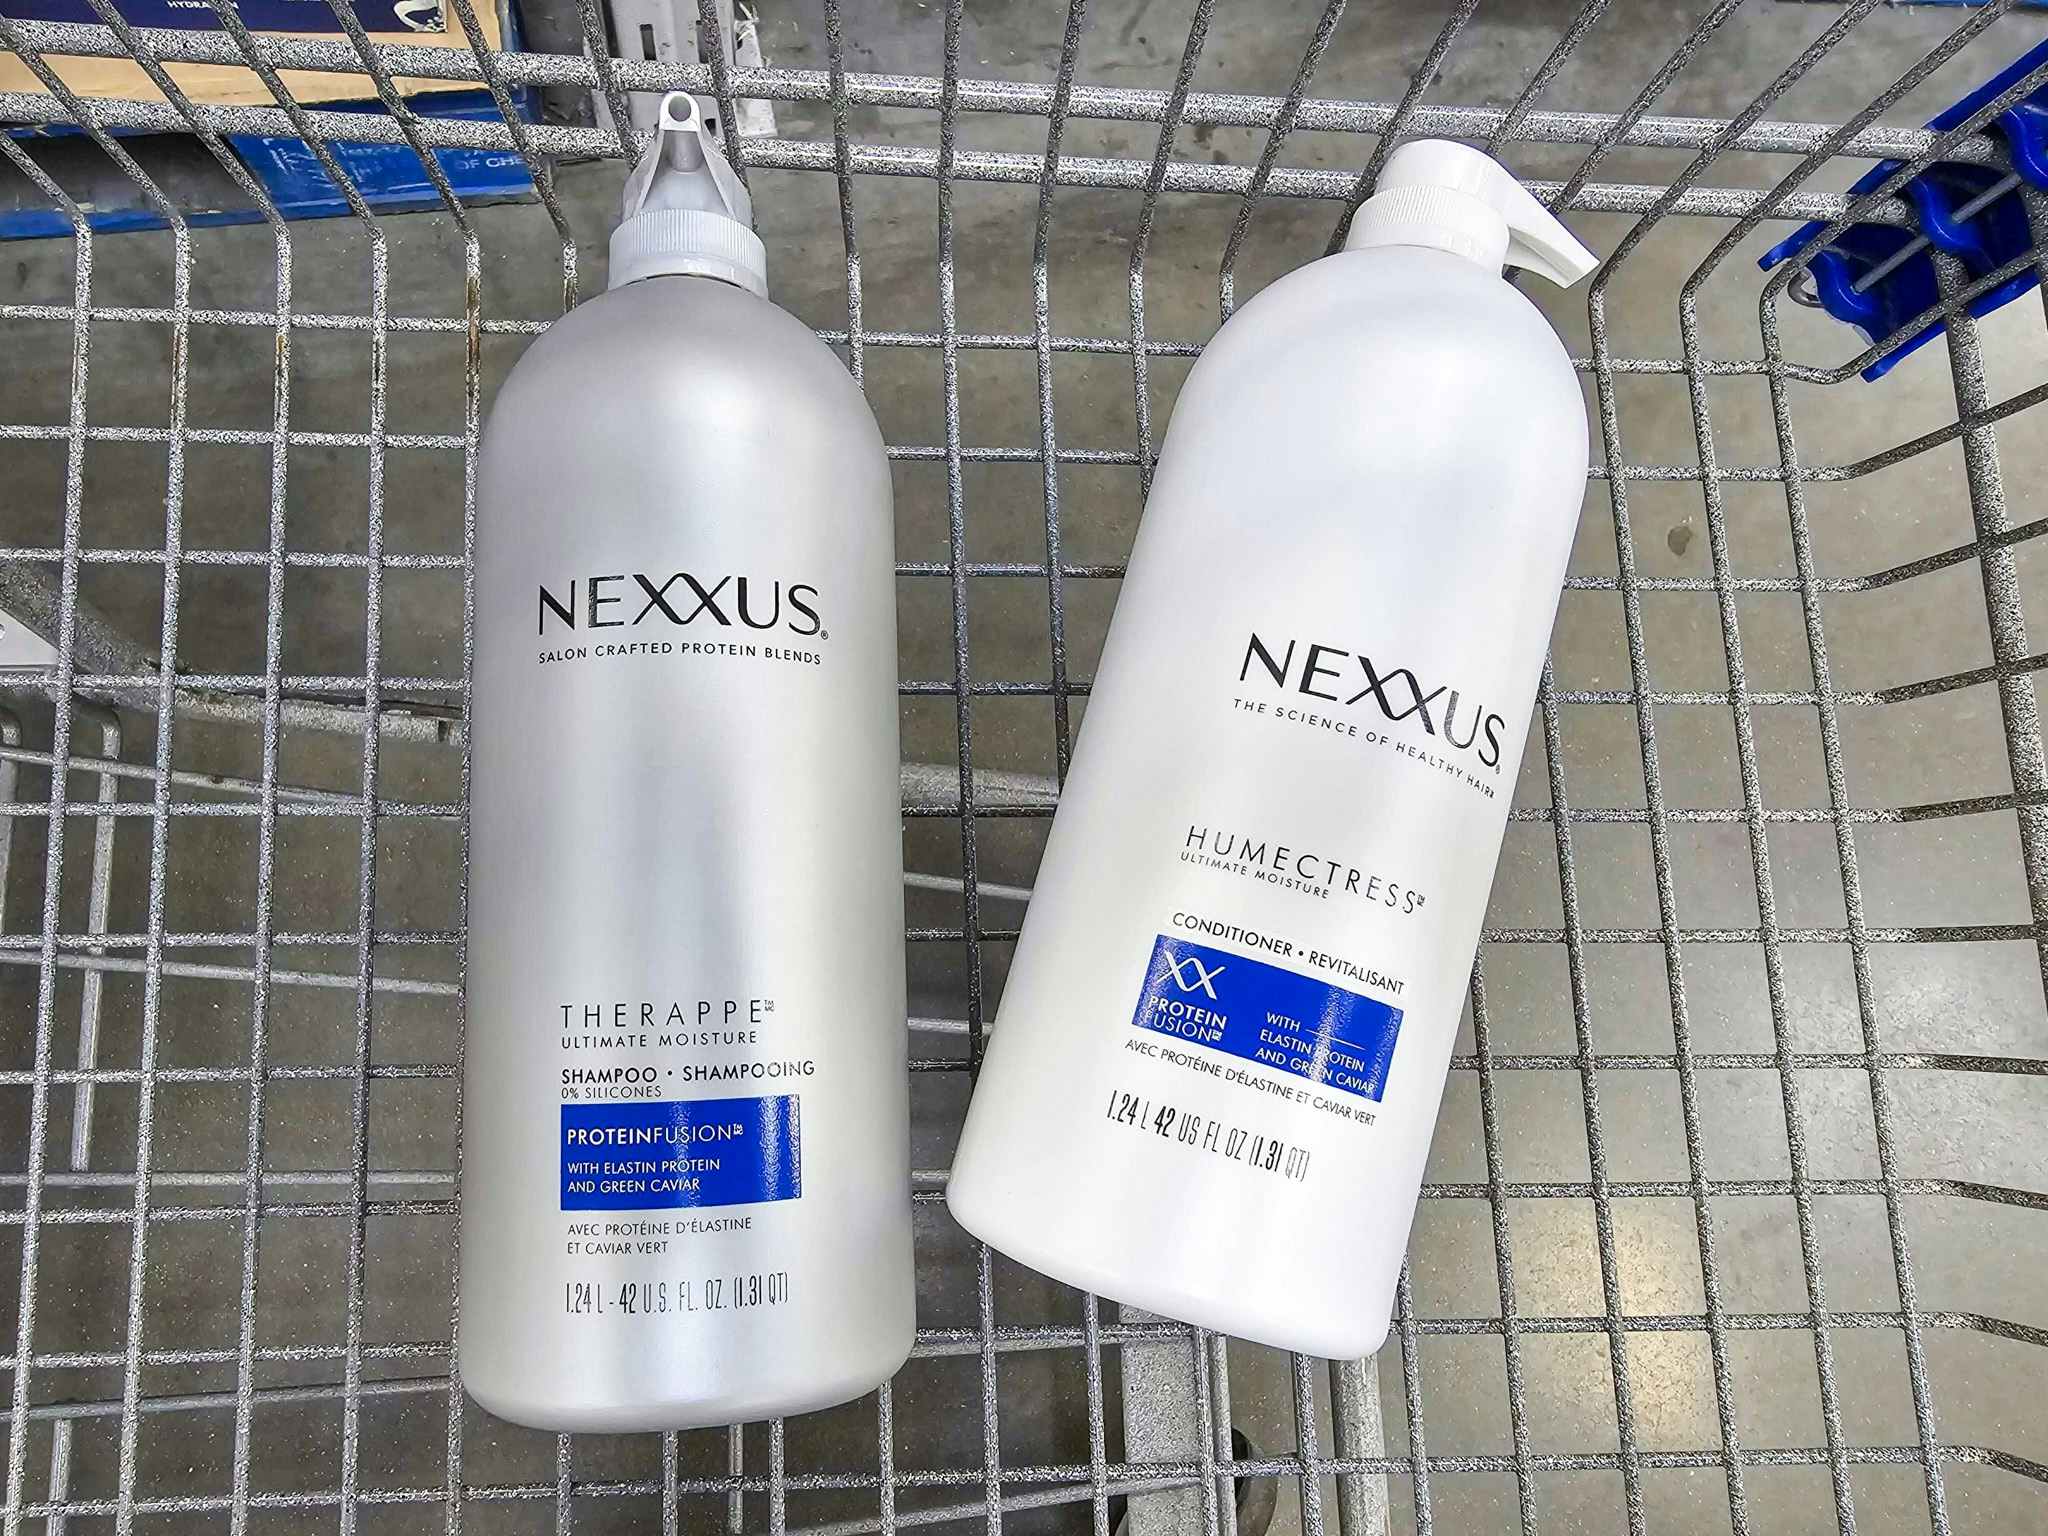 nexxus shampoo and conditioner in a cart